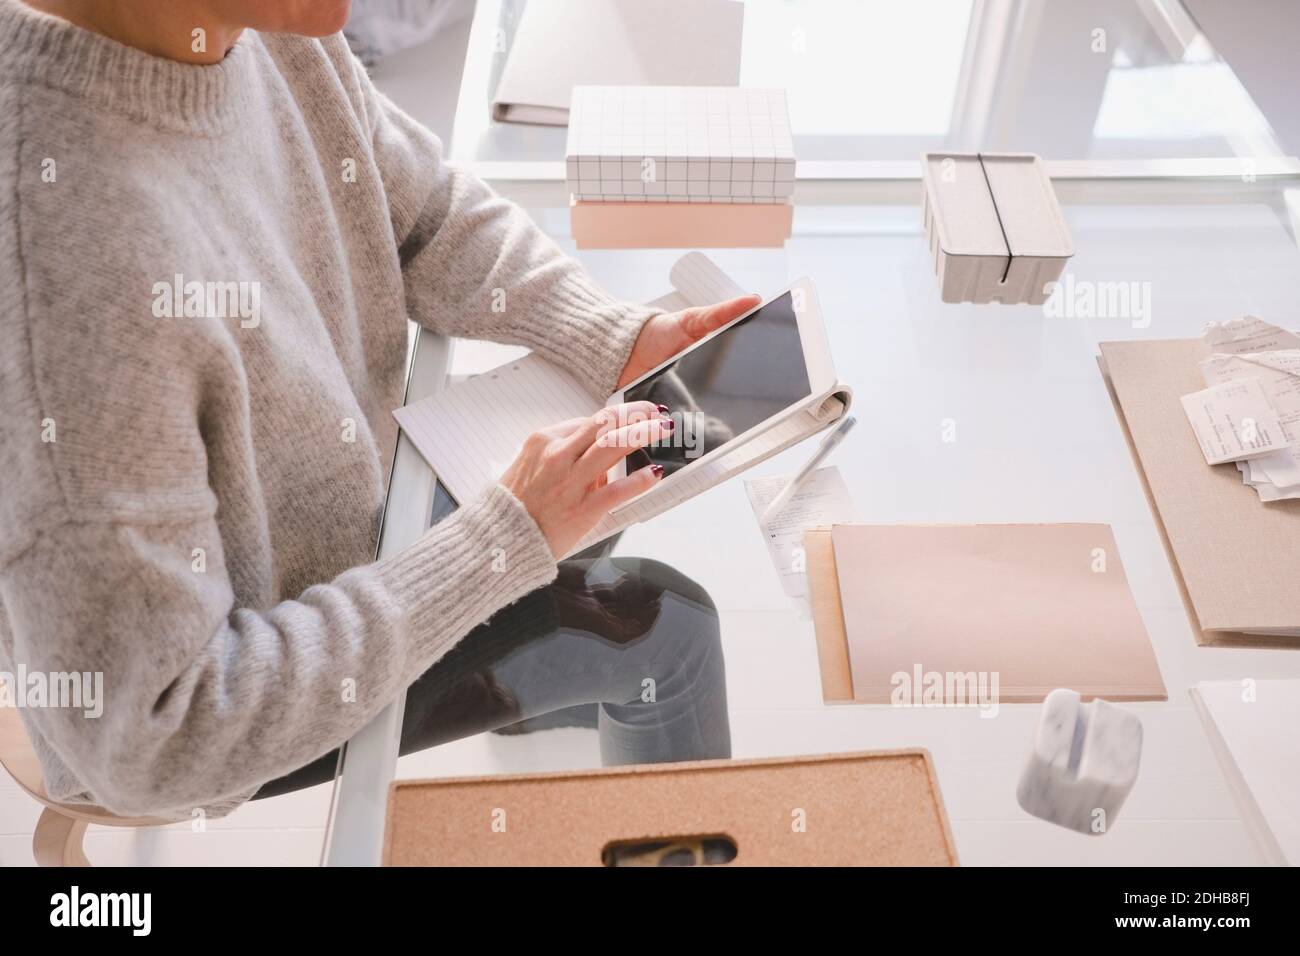 High angle view of female interior designer using digital tablet at desk in store Stock Photo